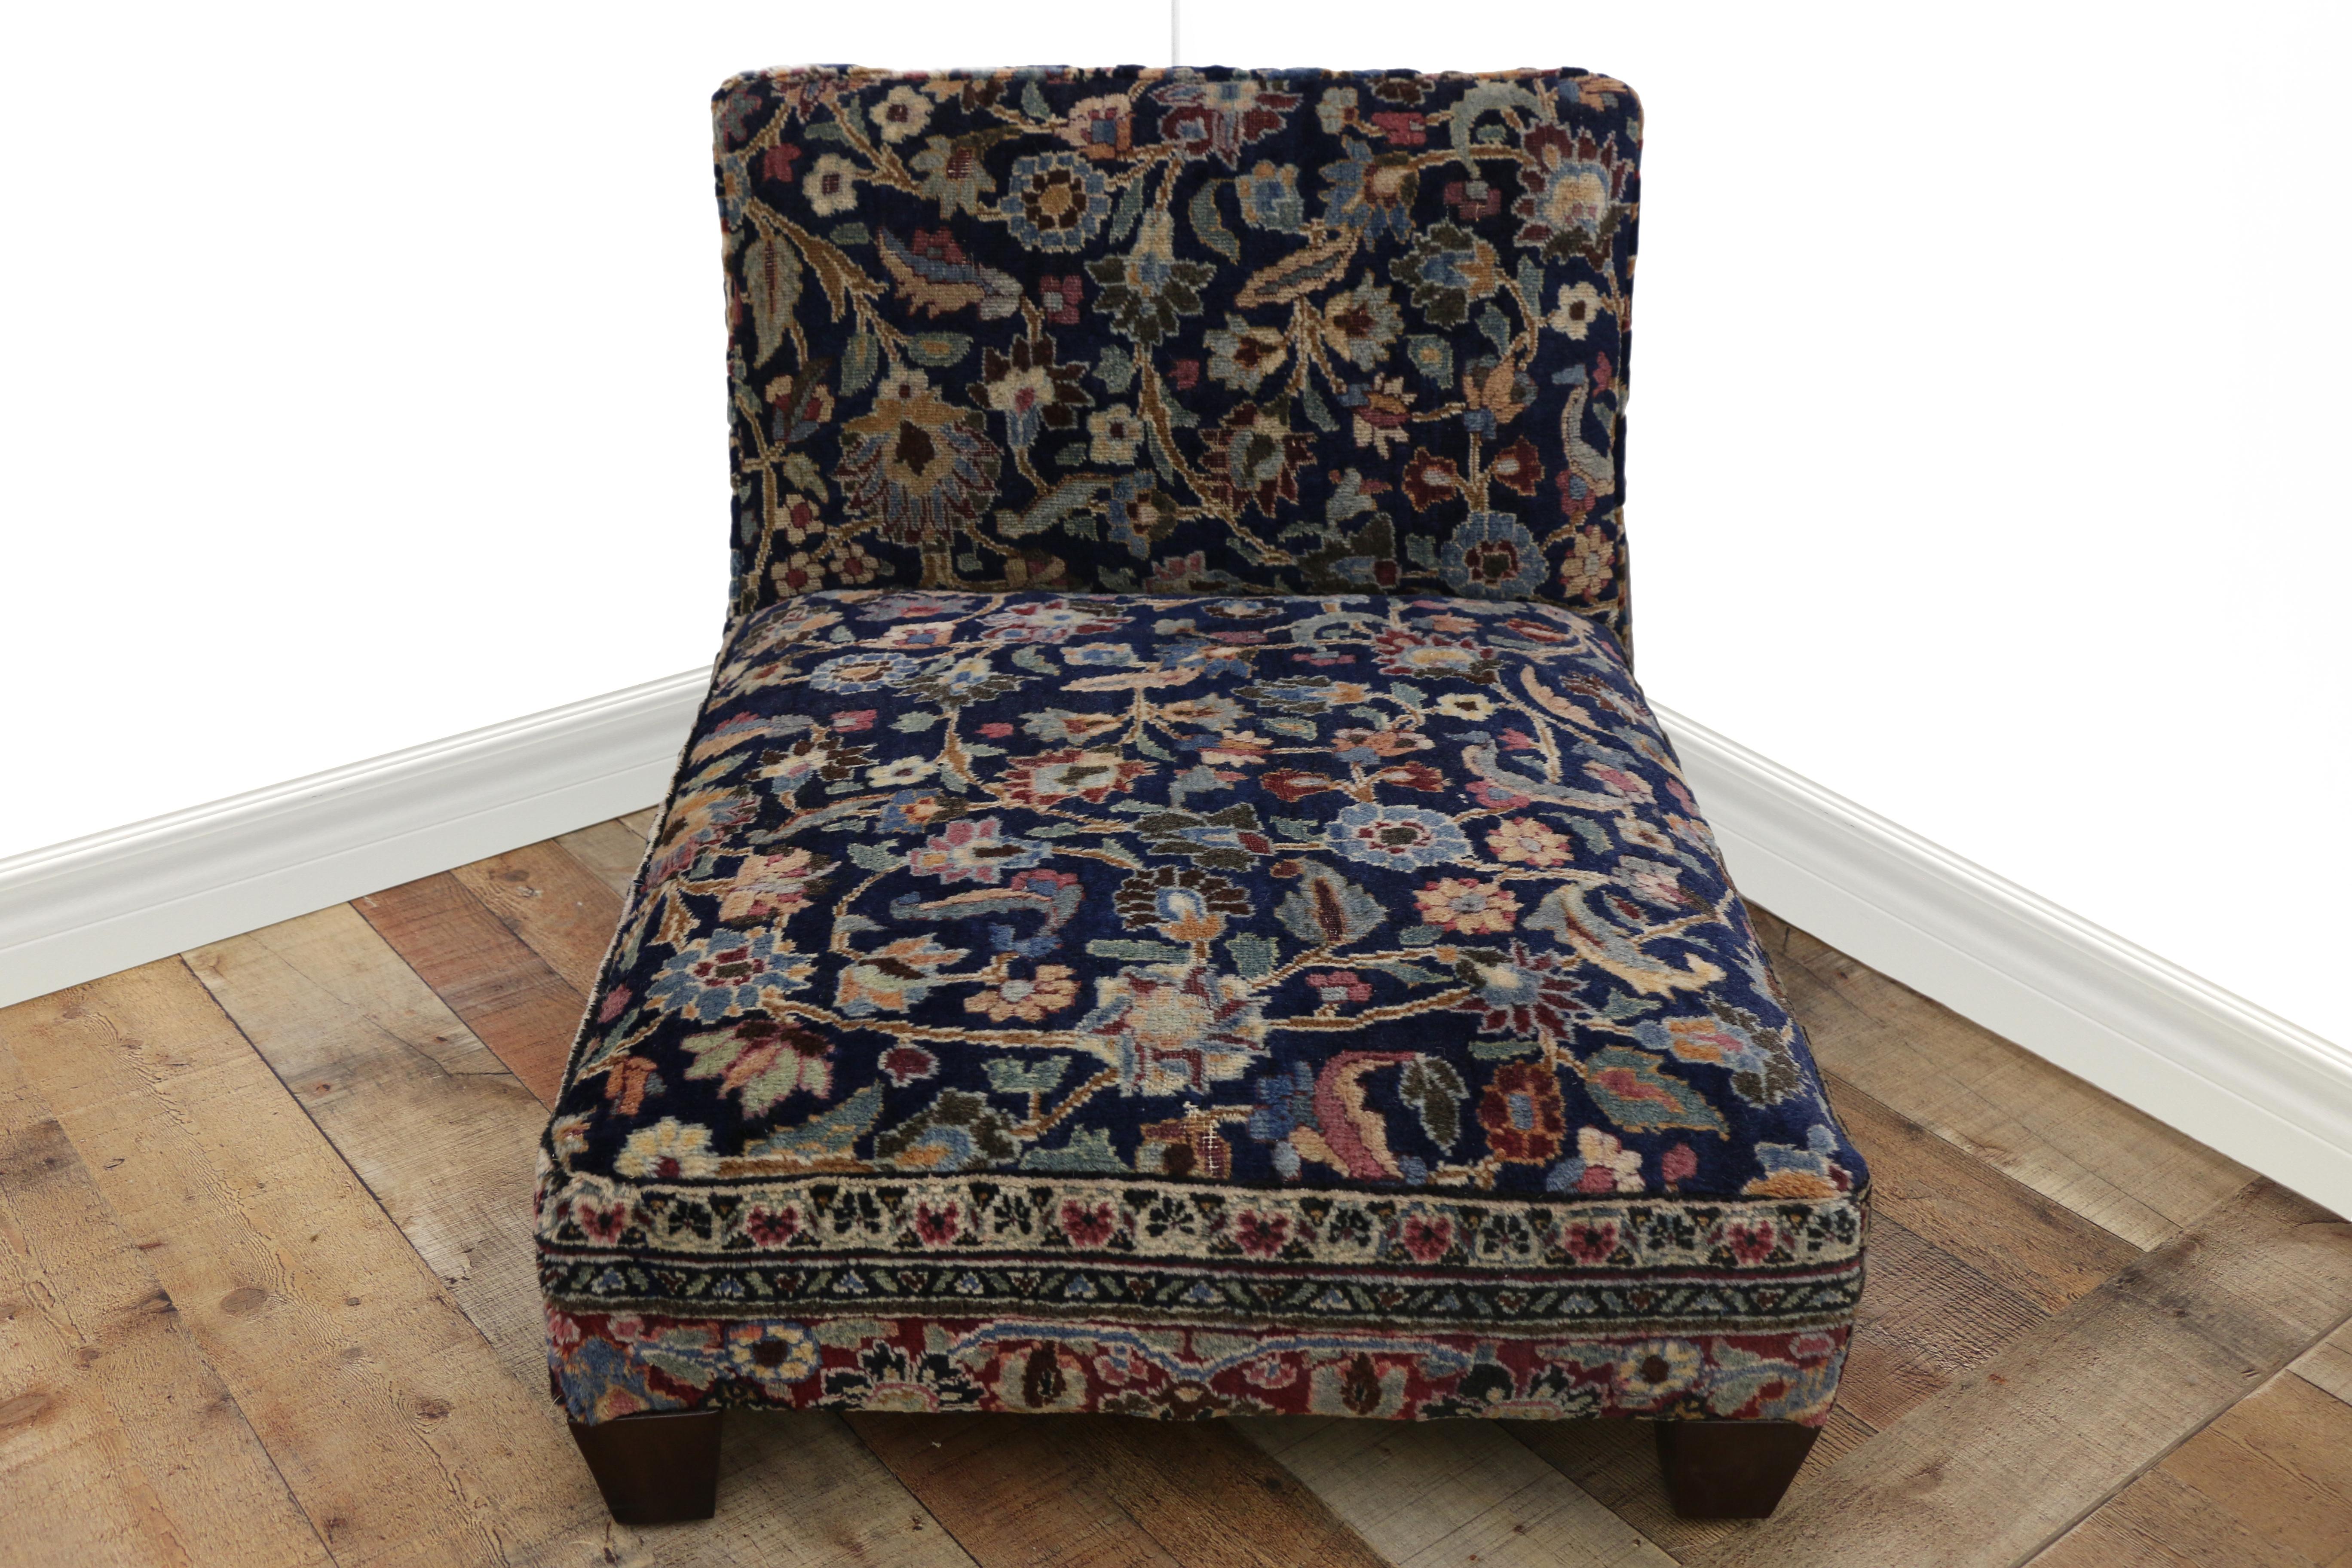 Victorian Low Profile Slipper Chair or Persian Petbed from Antique Persian Khorassan Rug